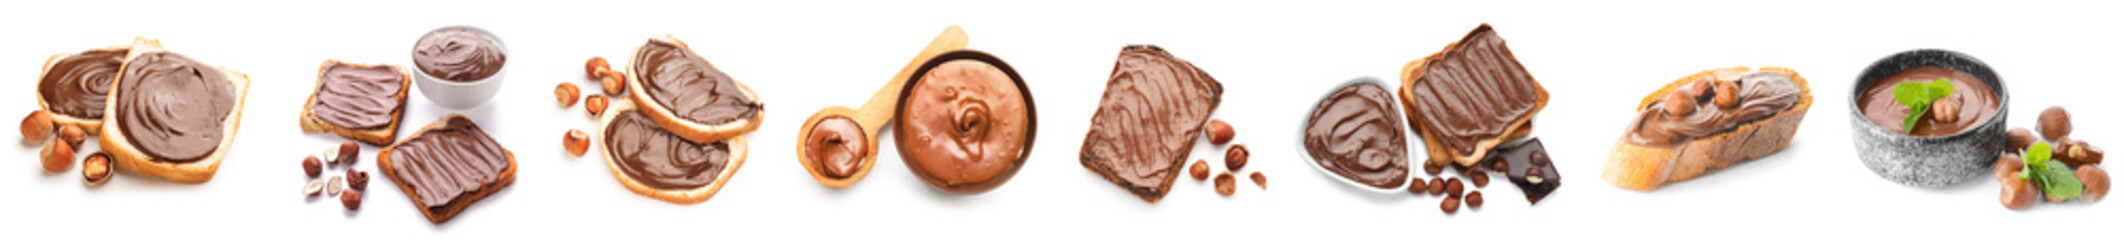 Collection of chocolate paste with hazelnuts and bread pieces on white background